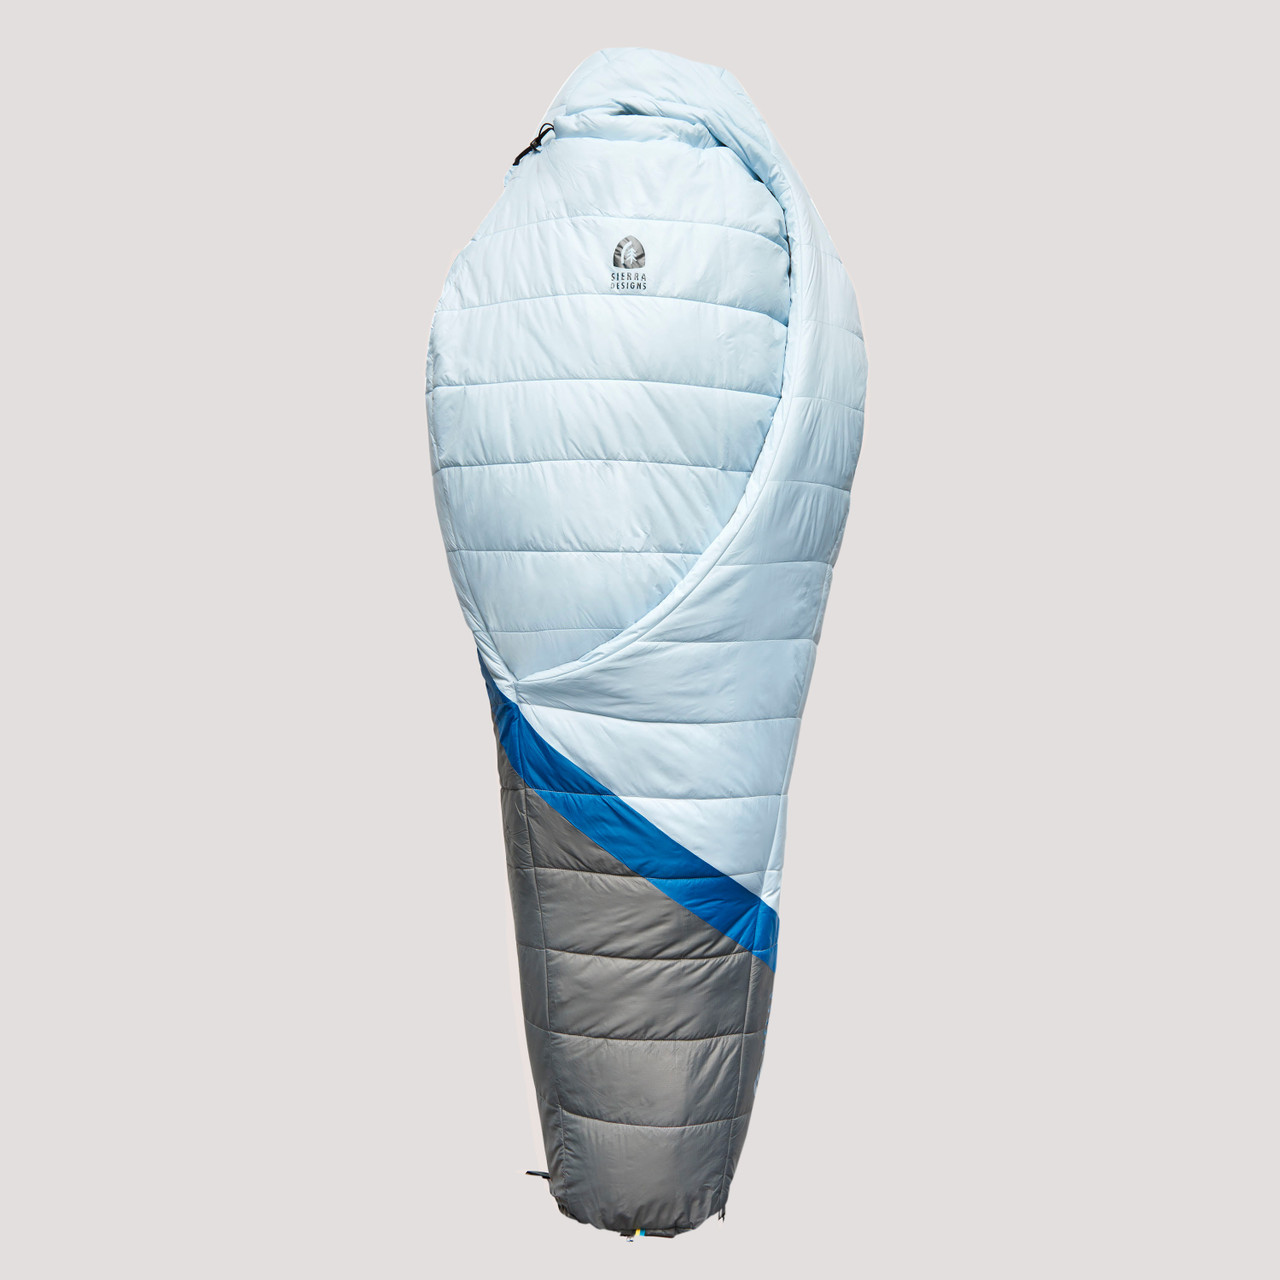 Sierra Designs Women's Night Cap 20 sleeping bag, blue, front view, partially opened